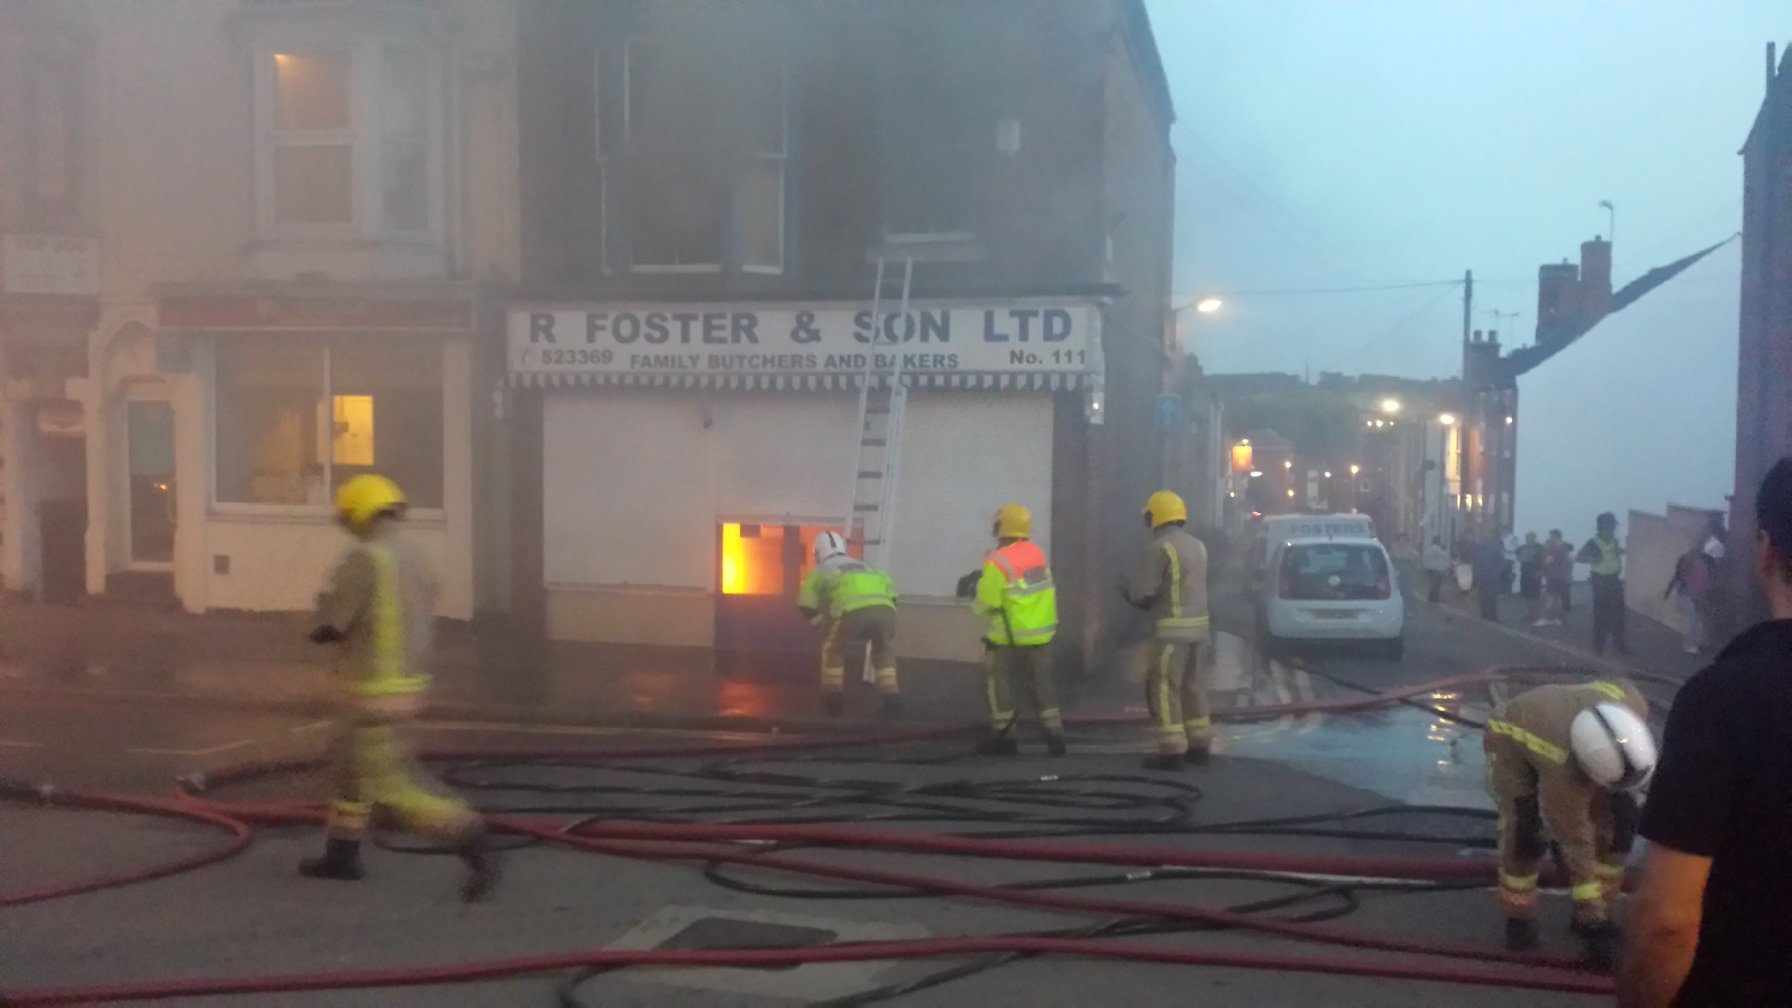 Lincolnshire Fire and Rescue tackle the blaze at Foster & Sons on Monks Road, Lincoln